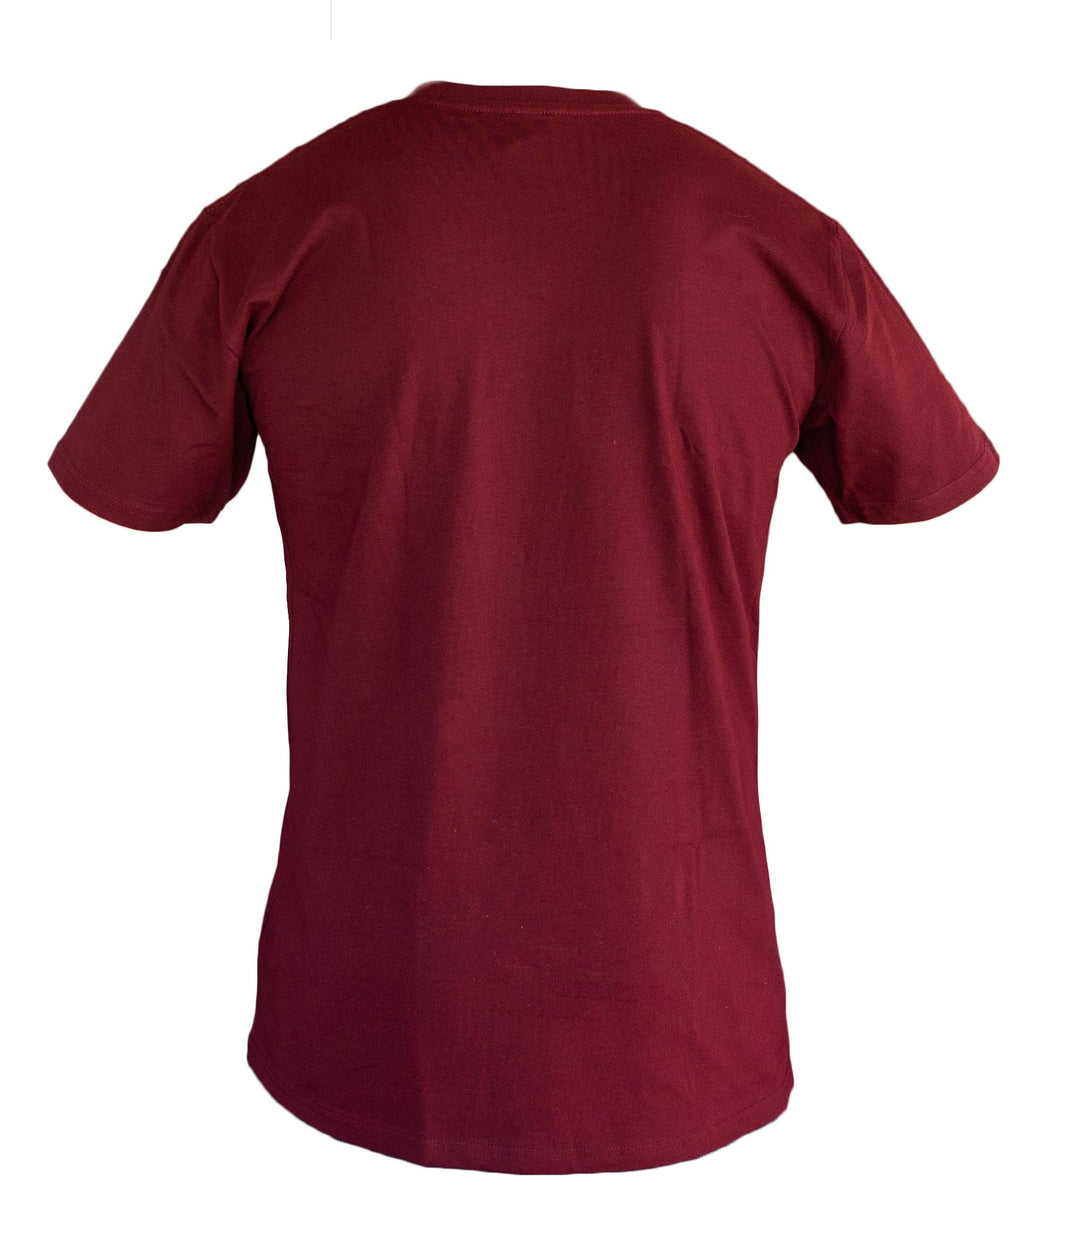 Image of the back of the mens Send It Inbound T-shirt without any decorations.